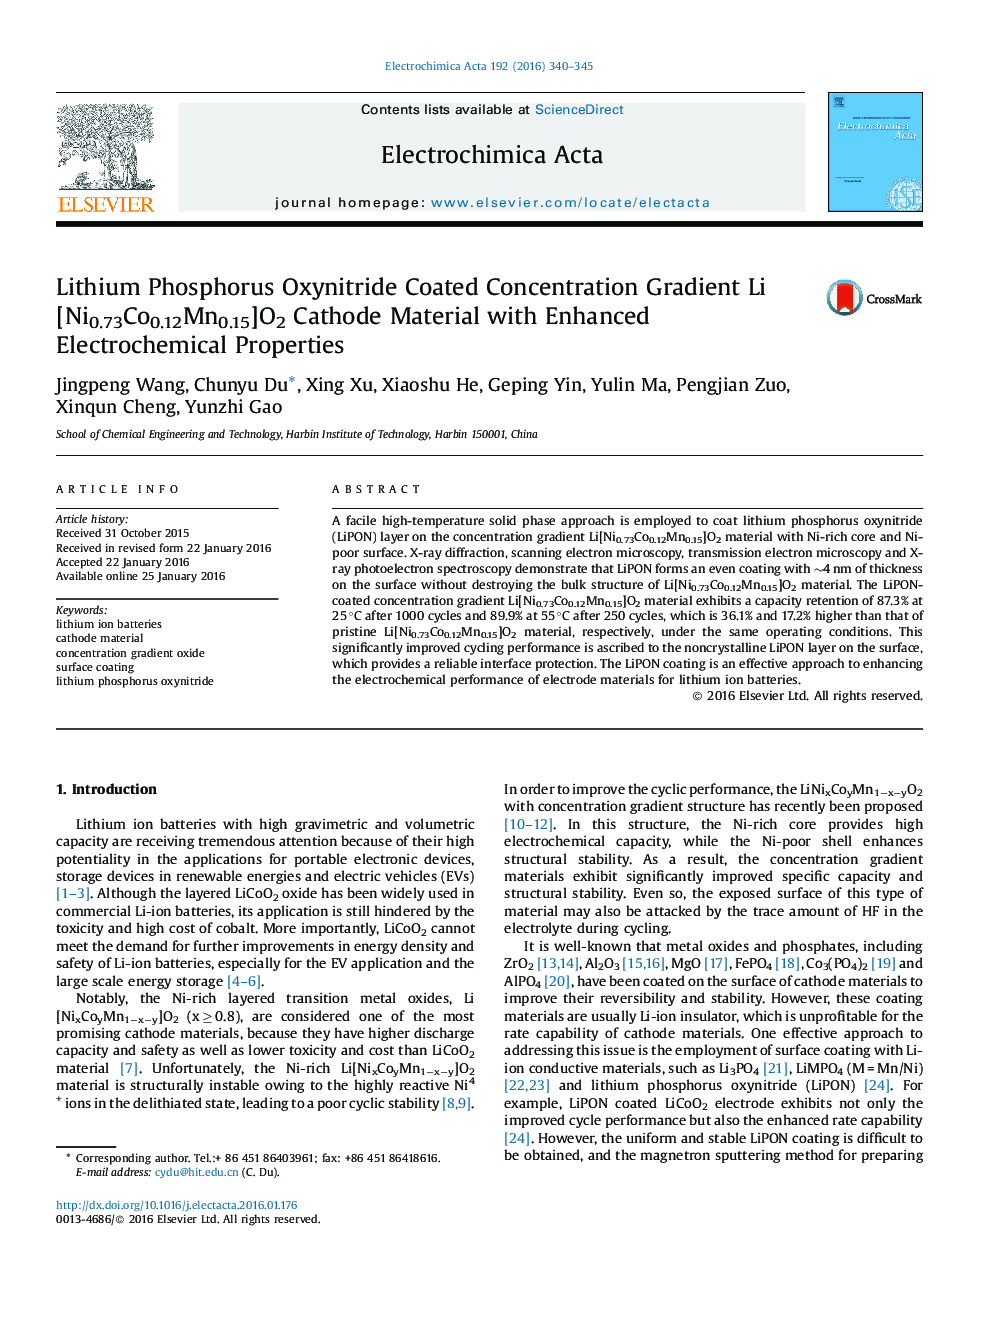 Lithium Phosphorus Oxynitride Coated Concentration Gradient Li[Ni0.73Co0.12Mn0.15]O2 Cathode Material with Enhanced Electrochemical Properties